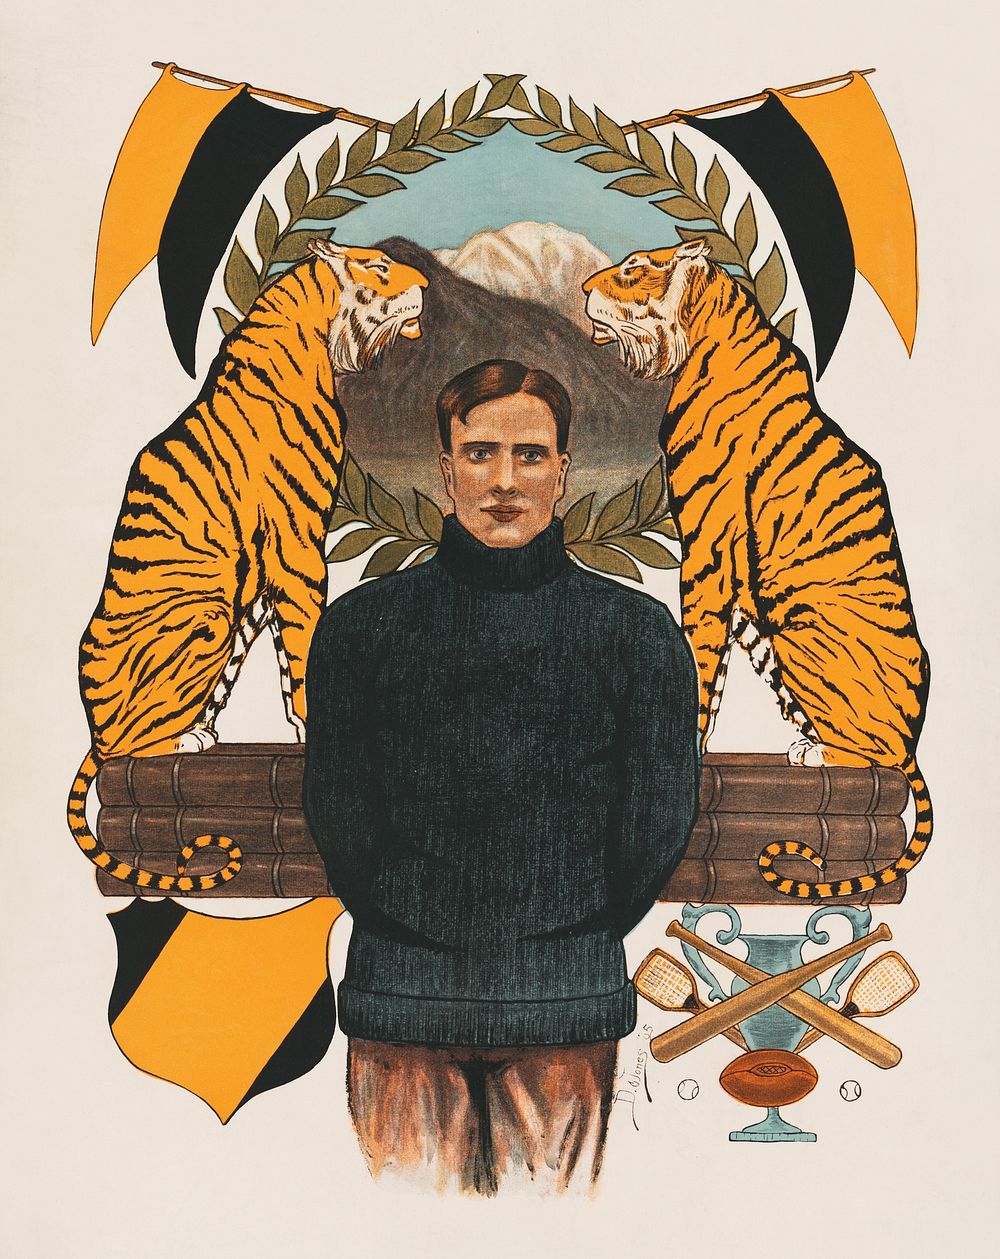 Aesthetic vintage man and tigers. Original public domain image by Whitney & Grimwood from the Library of Congress. Digitally…